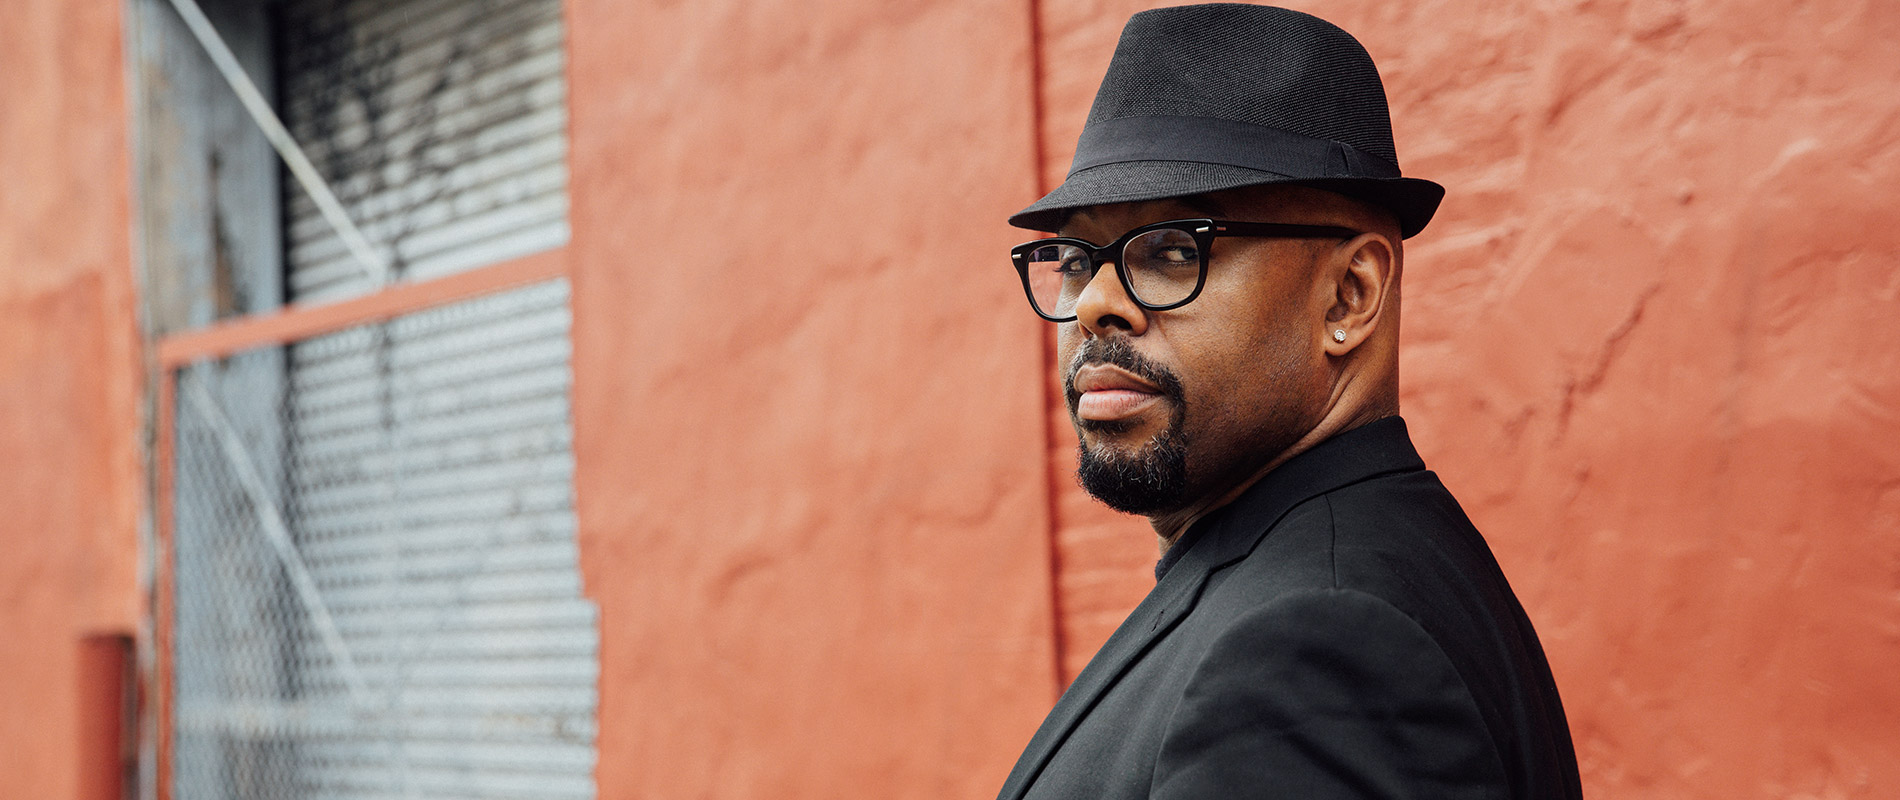 A man in a black suit, wearing a black fedora hat, black rimmed glasses and dark goatee looking back at the viewer over his left shoulder. An orange wall is in the background along with a gray garage door off into the distance on the left side of the composition.